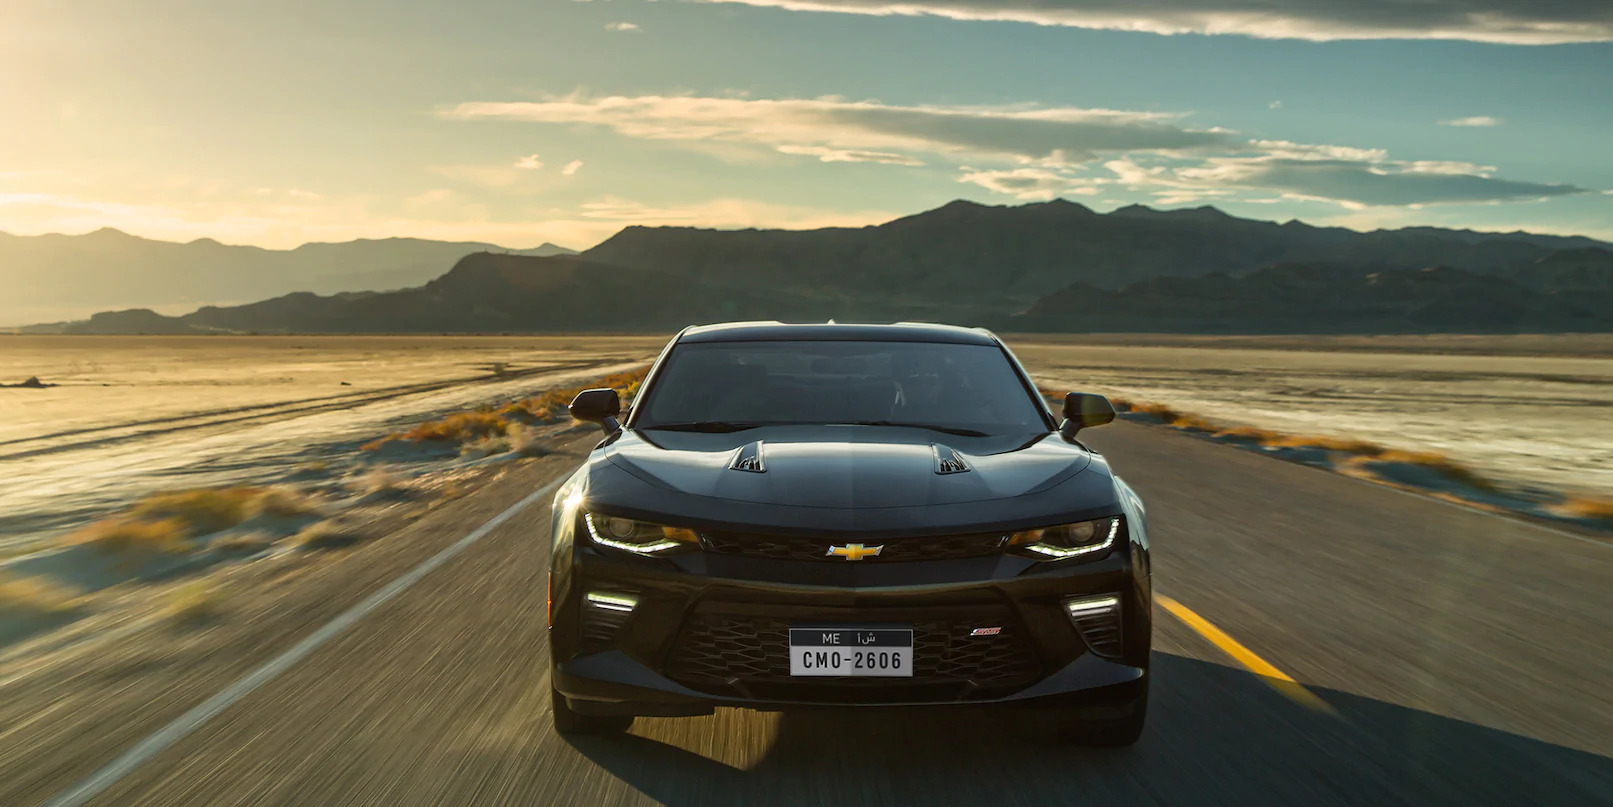 Every one of the Accessories You Want - Reasons to Buy a Chevrolet Car